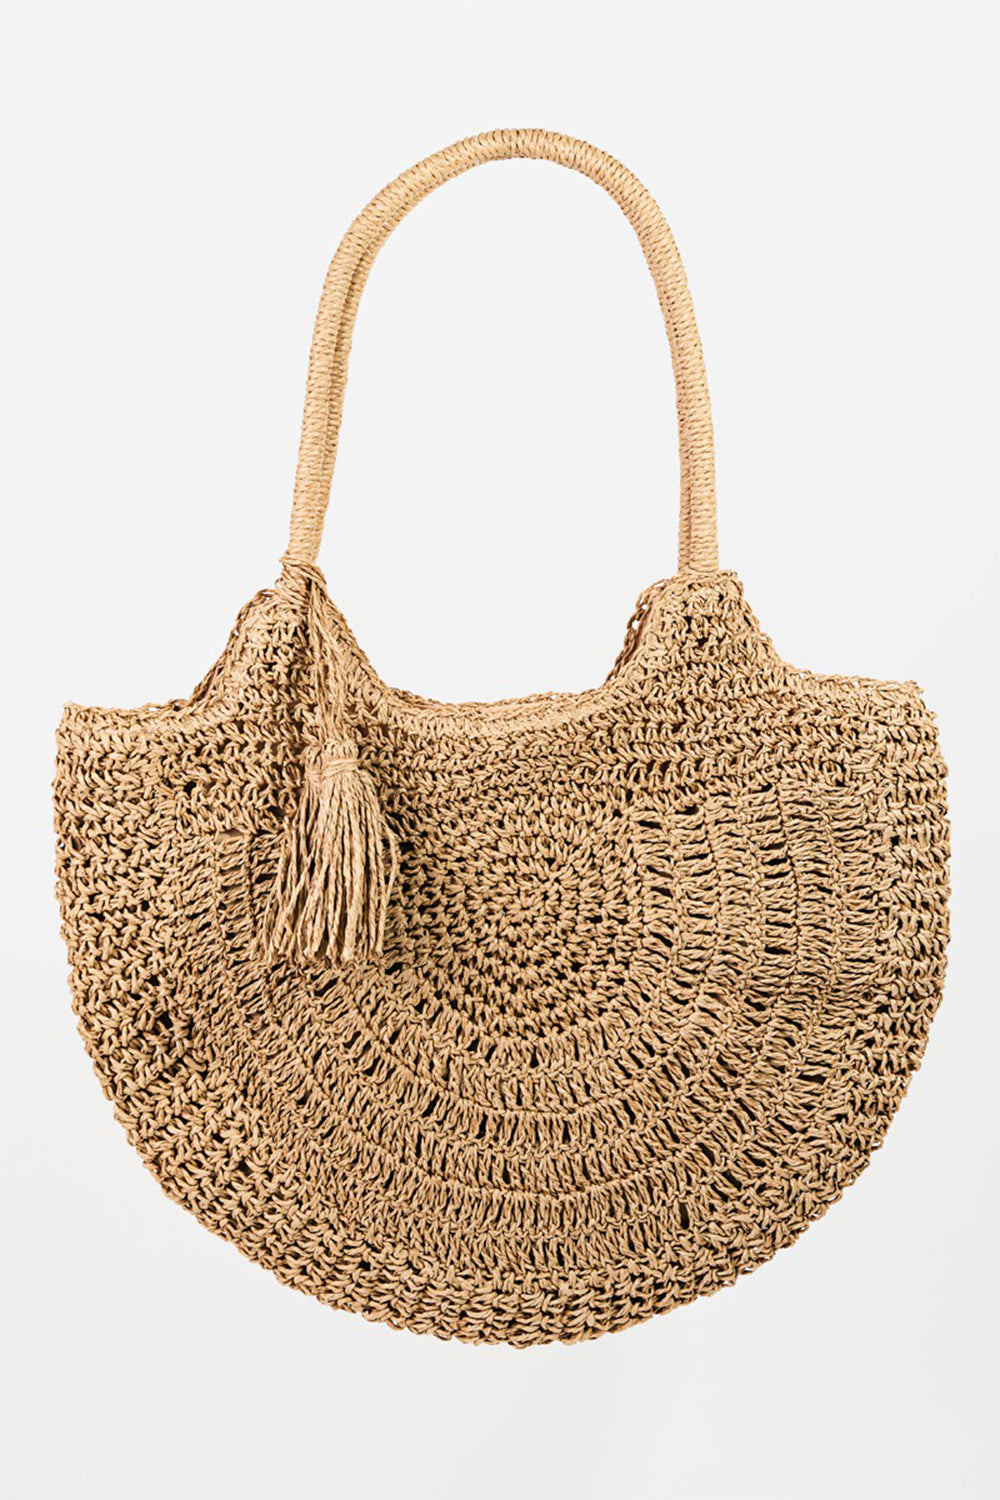 Fame Straw Braided Tote Bag with Tassel apparel & accessories